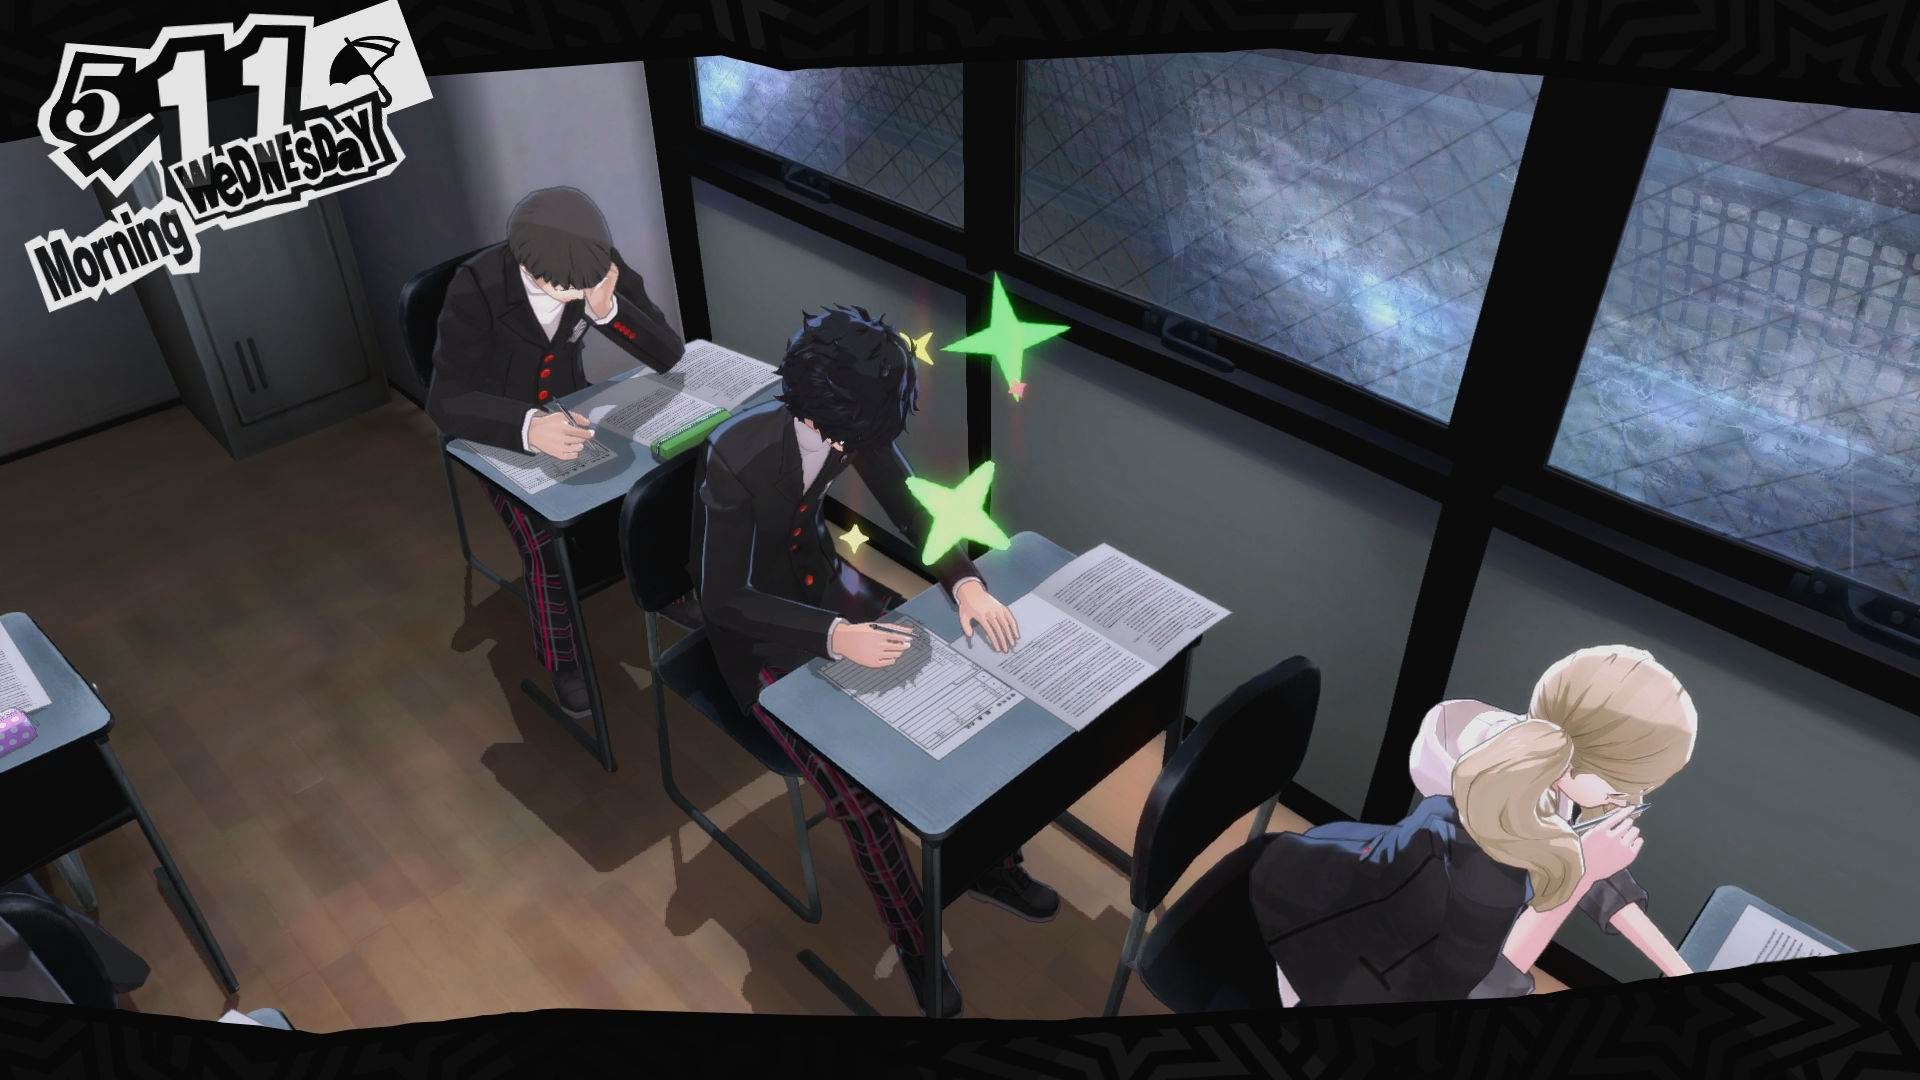 Persona 5 answers; protagonist studying